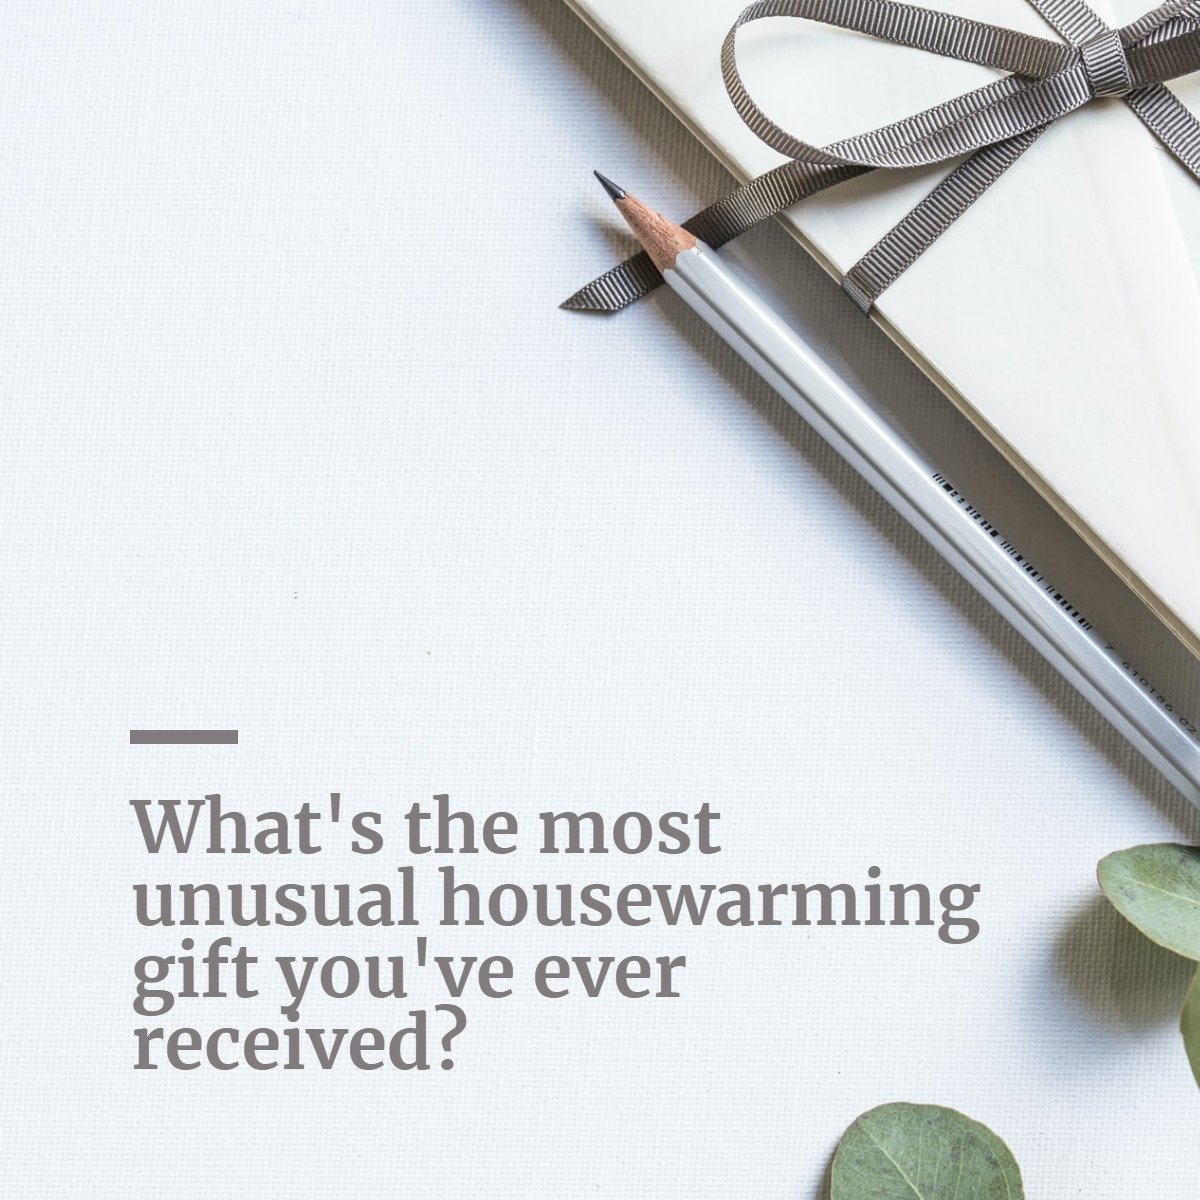 What's the most unusual housewarming gift you've ever received? 🎁

#housewarming #housewarminggift #homeowner #rentvsown #realestatefun #realestate 
 #realestatetips #realestate #realestateagent #realtor #realestatelife #realestateadvice #sellers #buyers #homebuyers